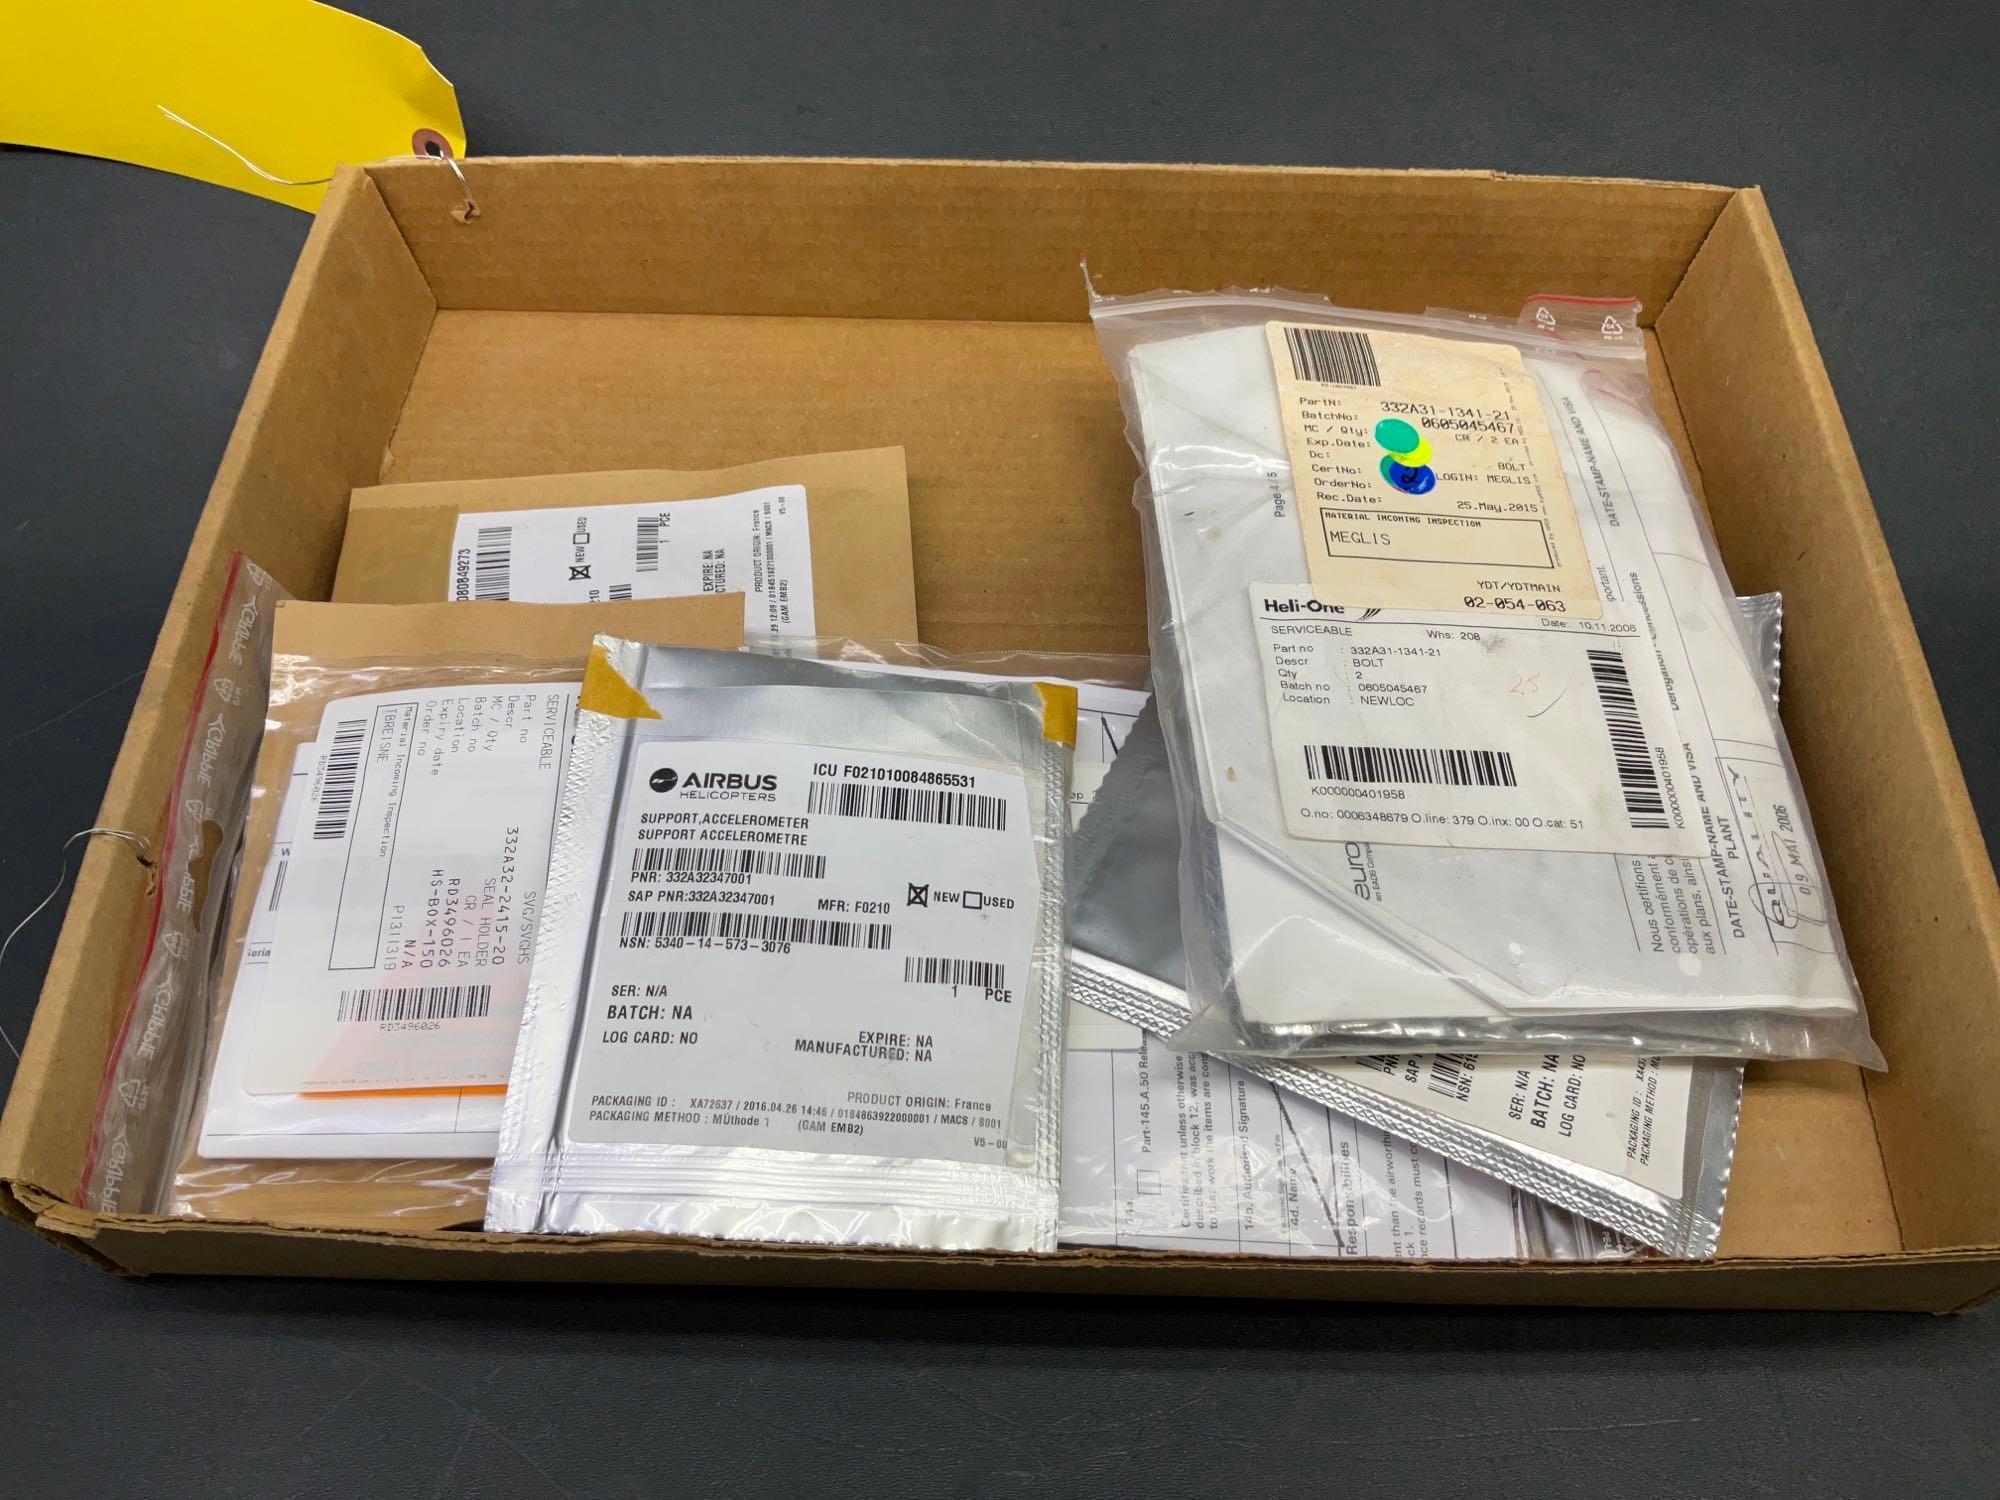 BOXES OF NEW MAIN ROTOR/TAIL ROTOR EXPENDABLES 332A31-1553-02, 332A32-2415-20, 332A31-1341-21,